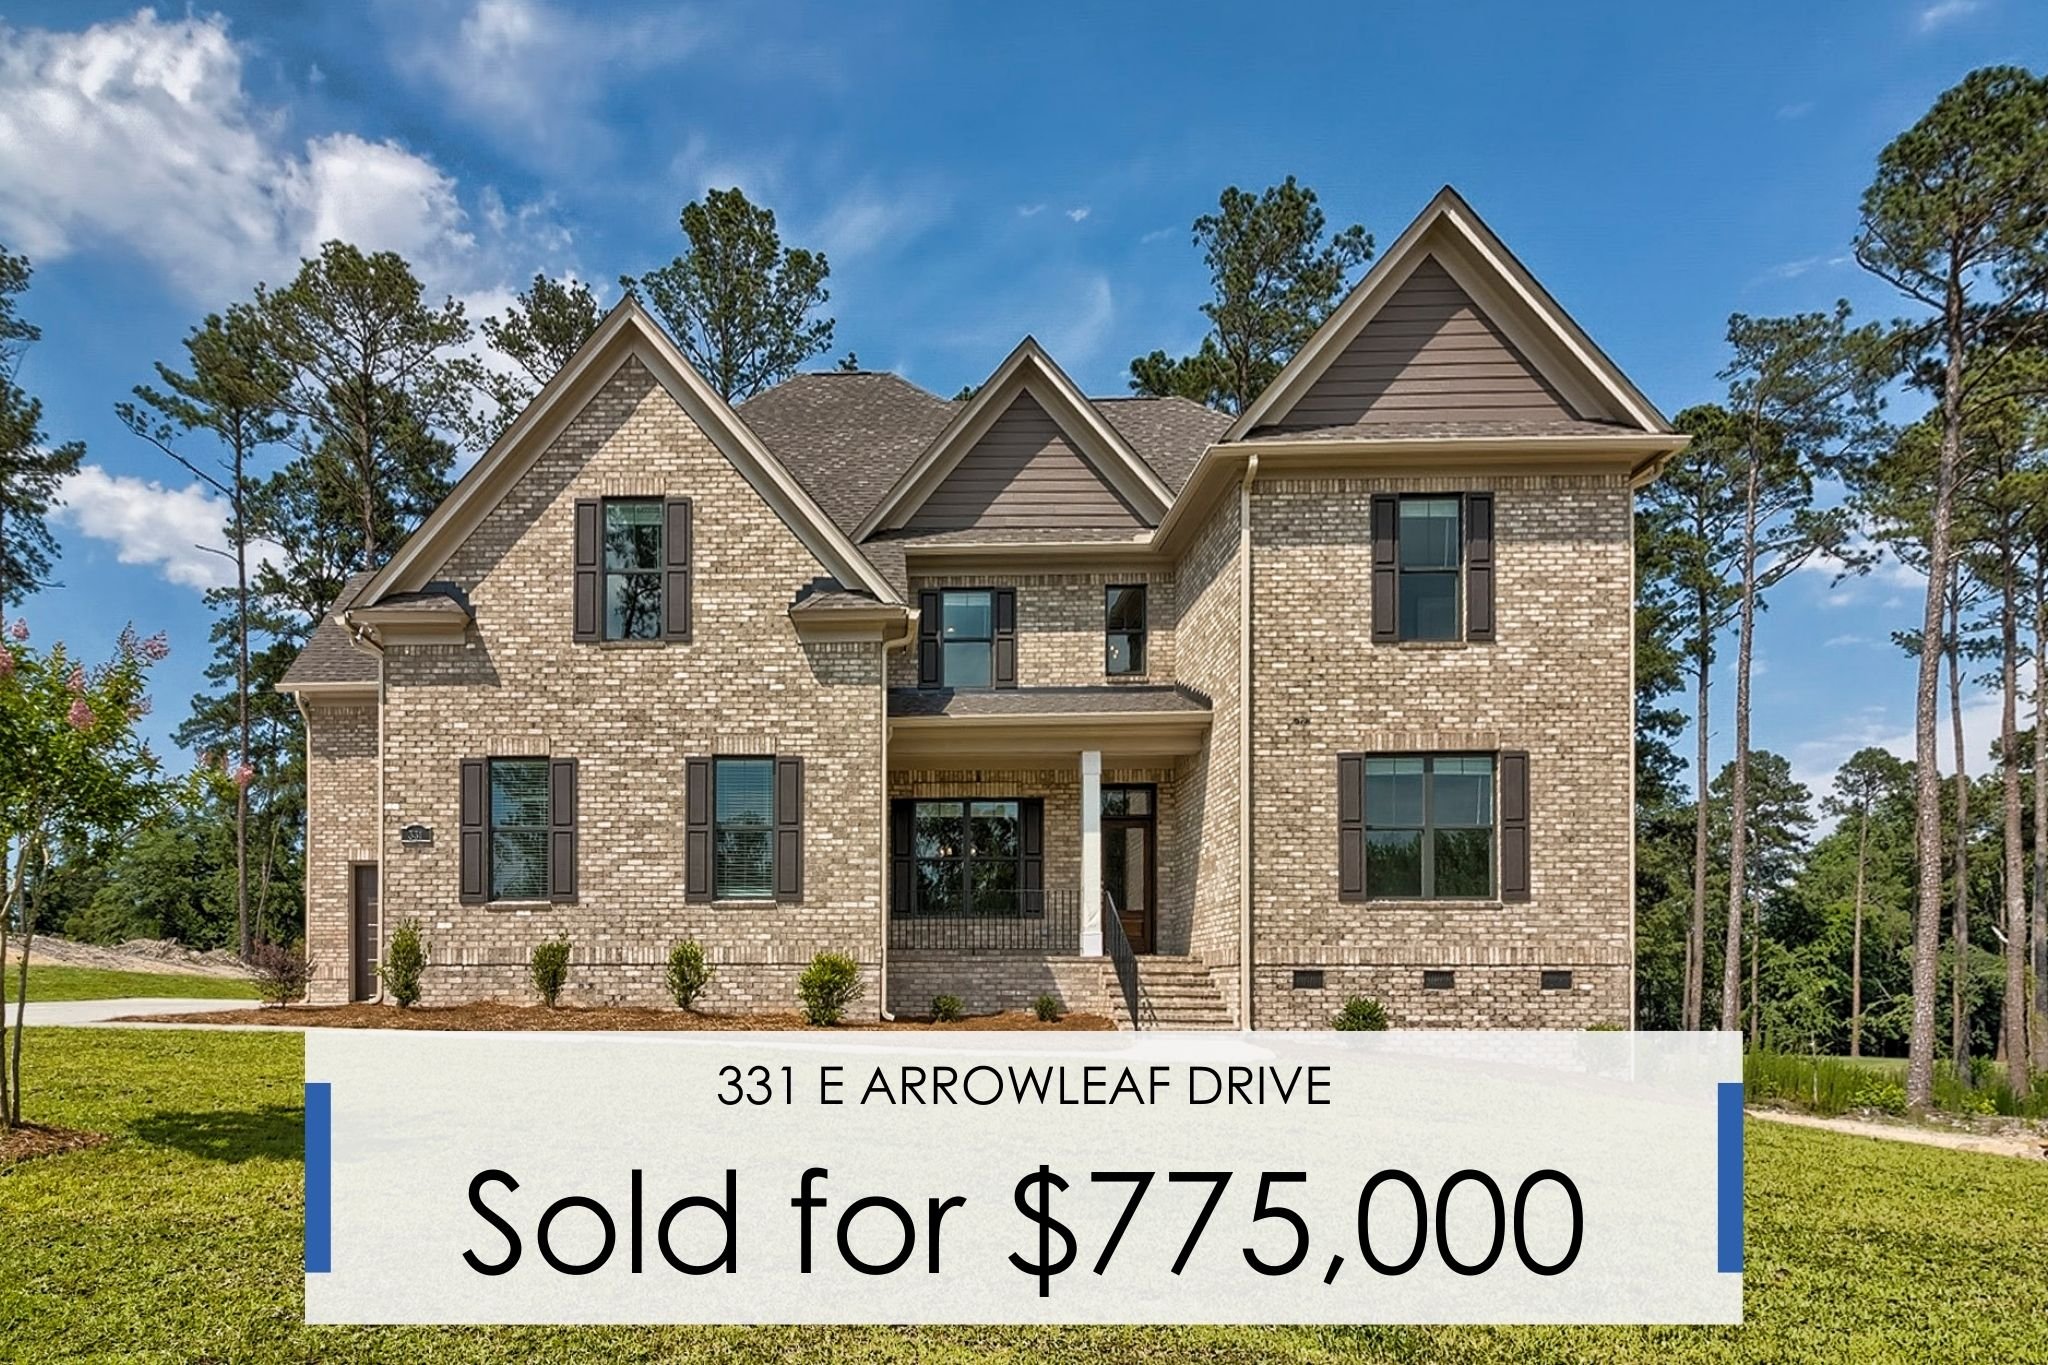 331 E Arrowleaf Drive | Sold for $775,000